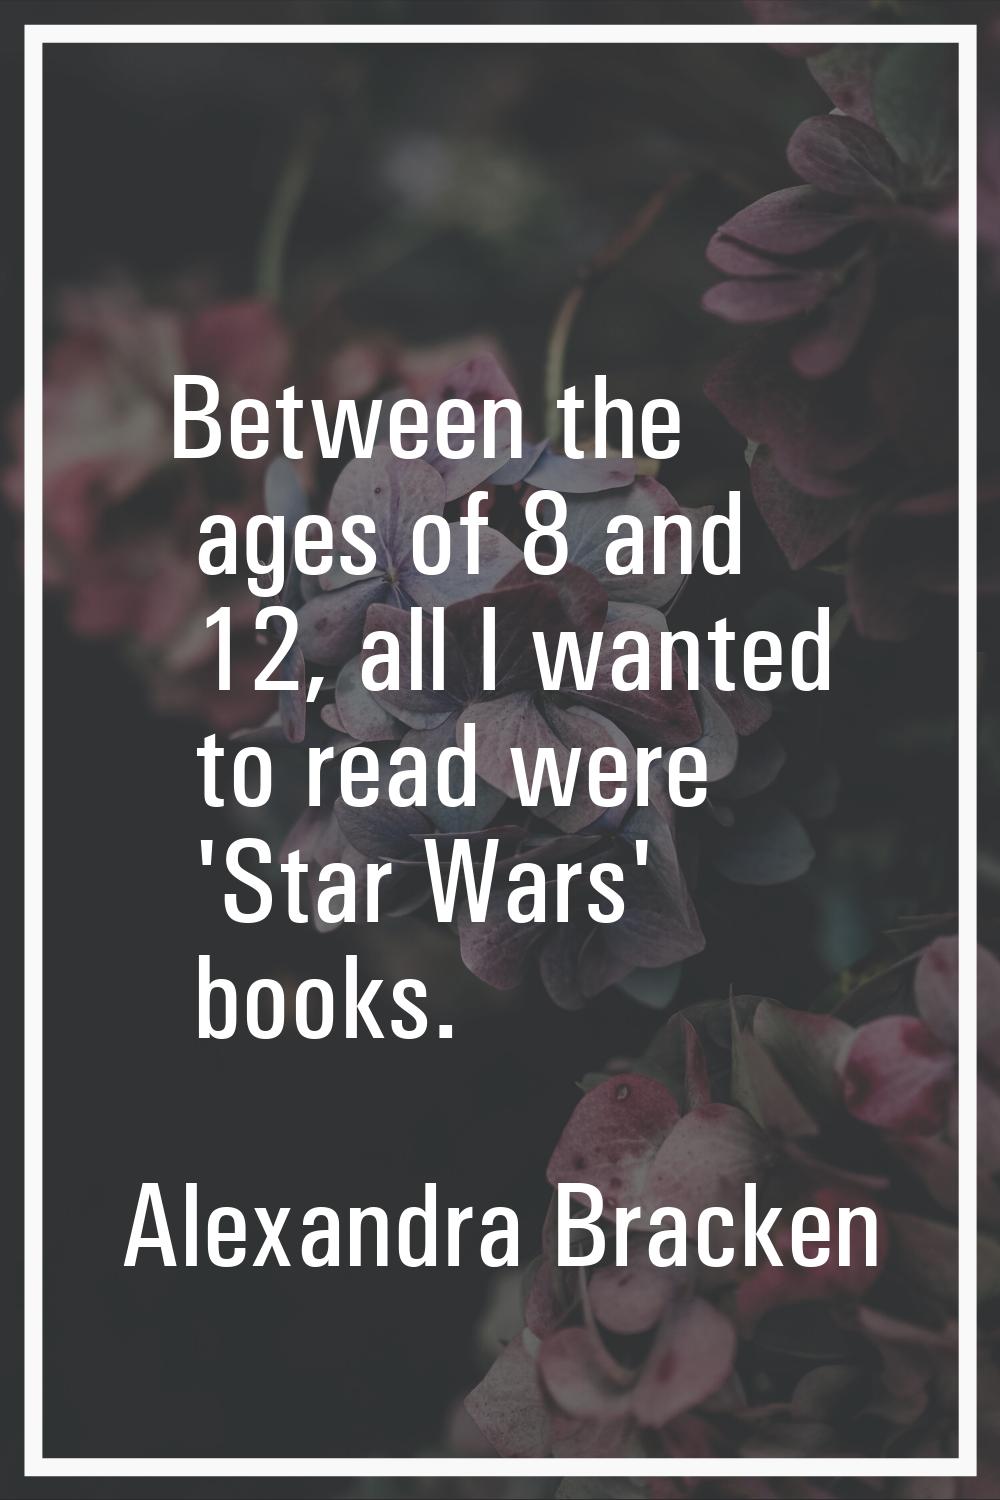 Between the ages of 8 and 12, all I wanted to read were 'Star Wars' books.